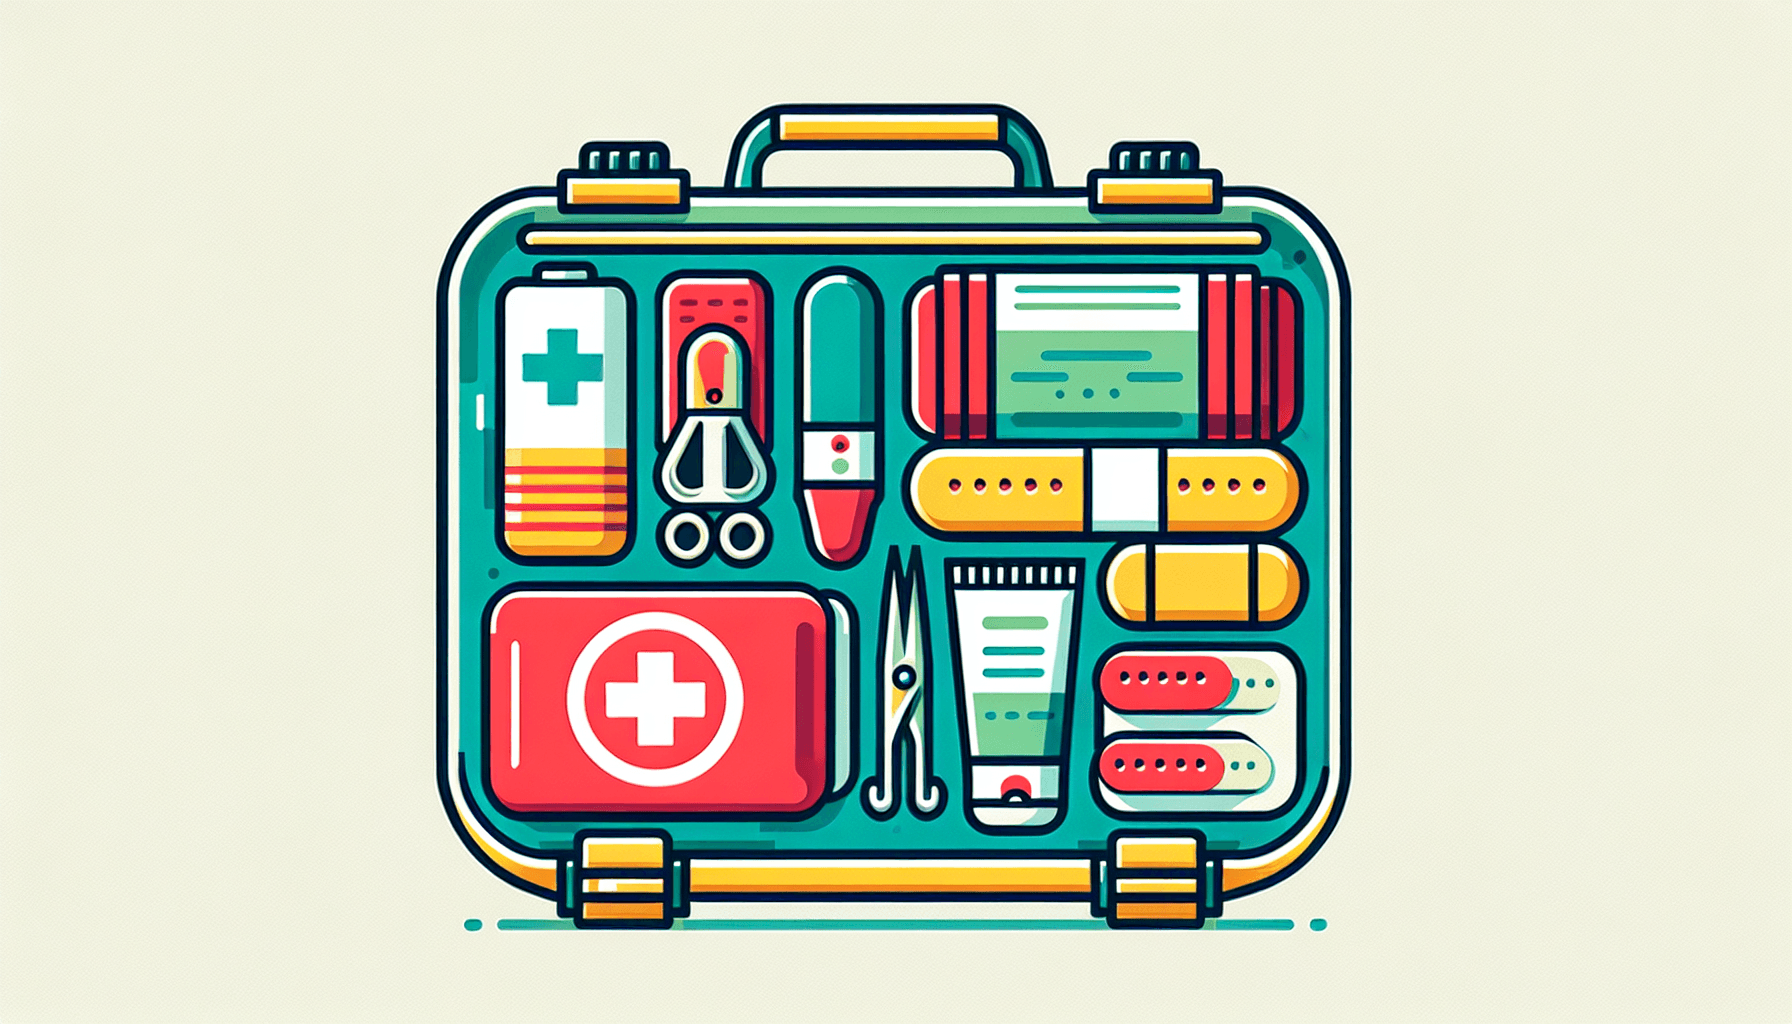 First-aid kit in flat illustration style and white background, red #f47574, green #88c7a8, yellow #fcc44b, and blue #645bc8 colors.